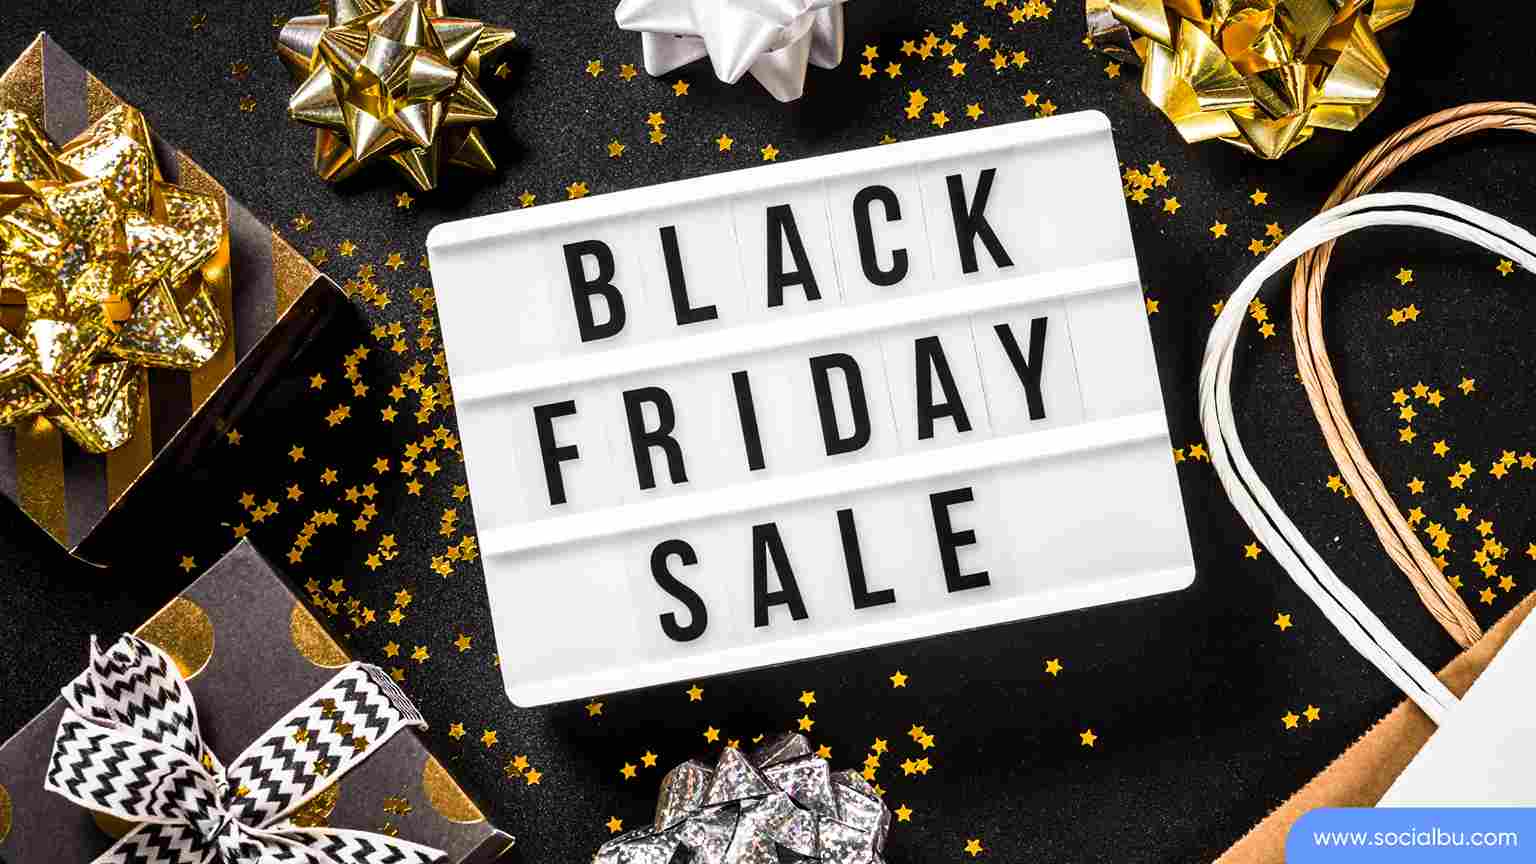 Participate in Black Friday shopping events